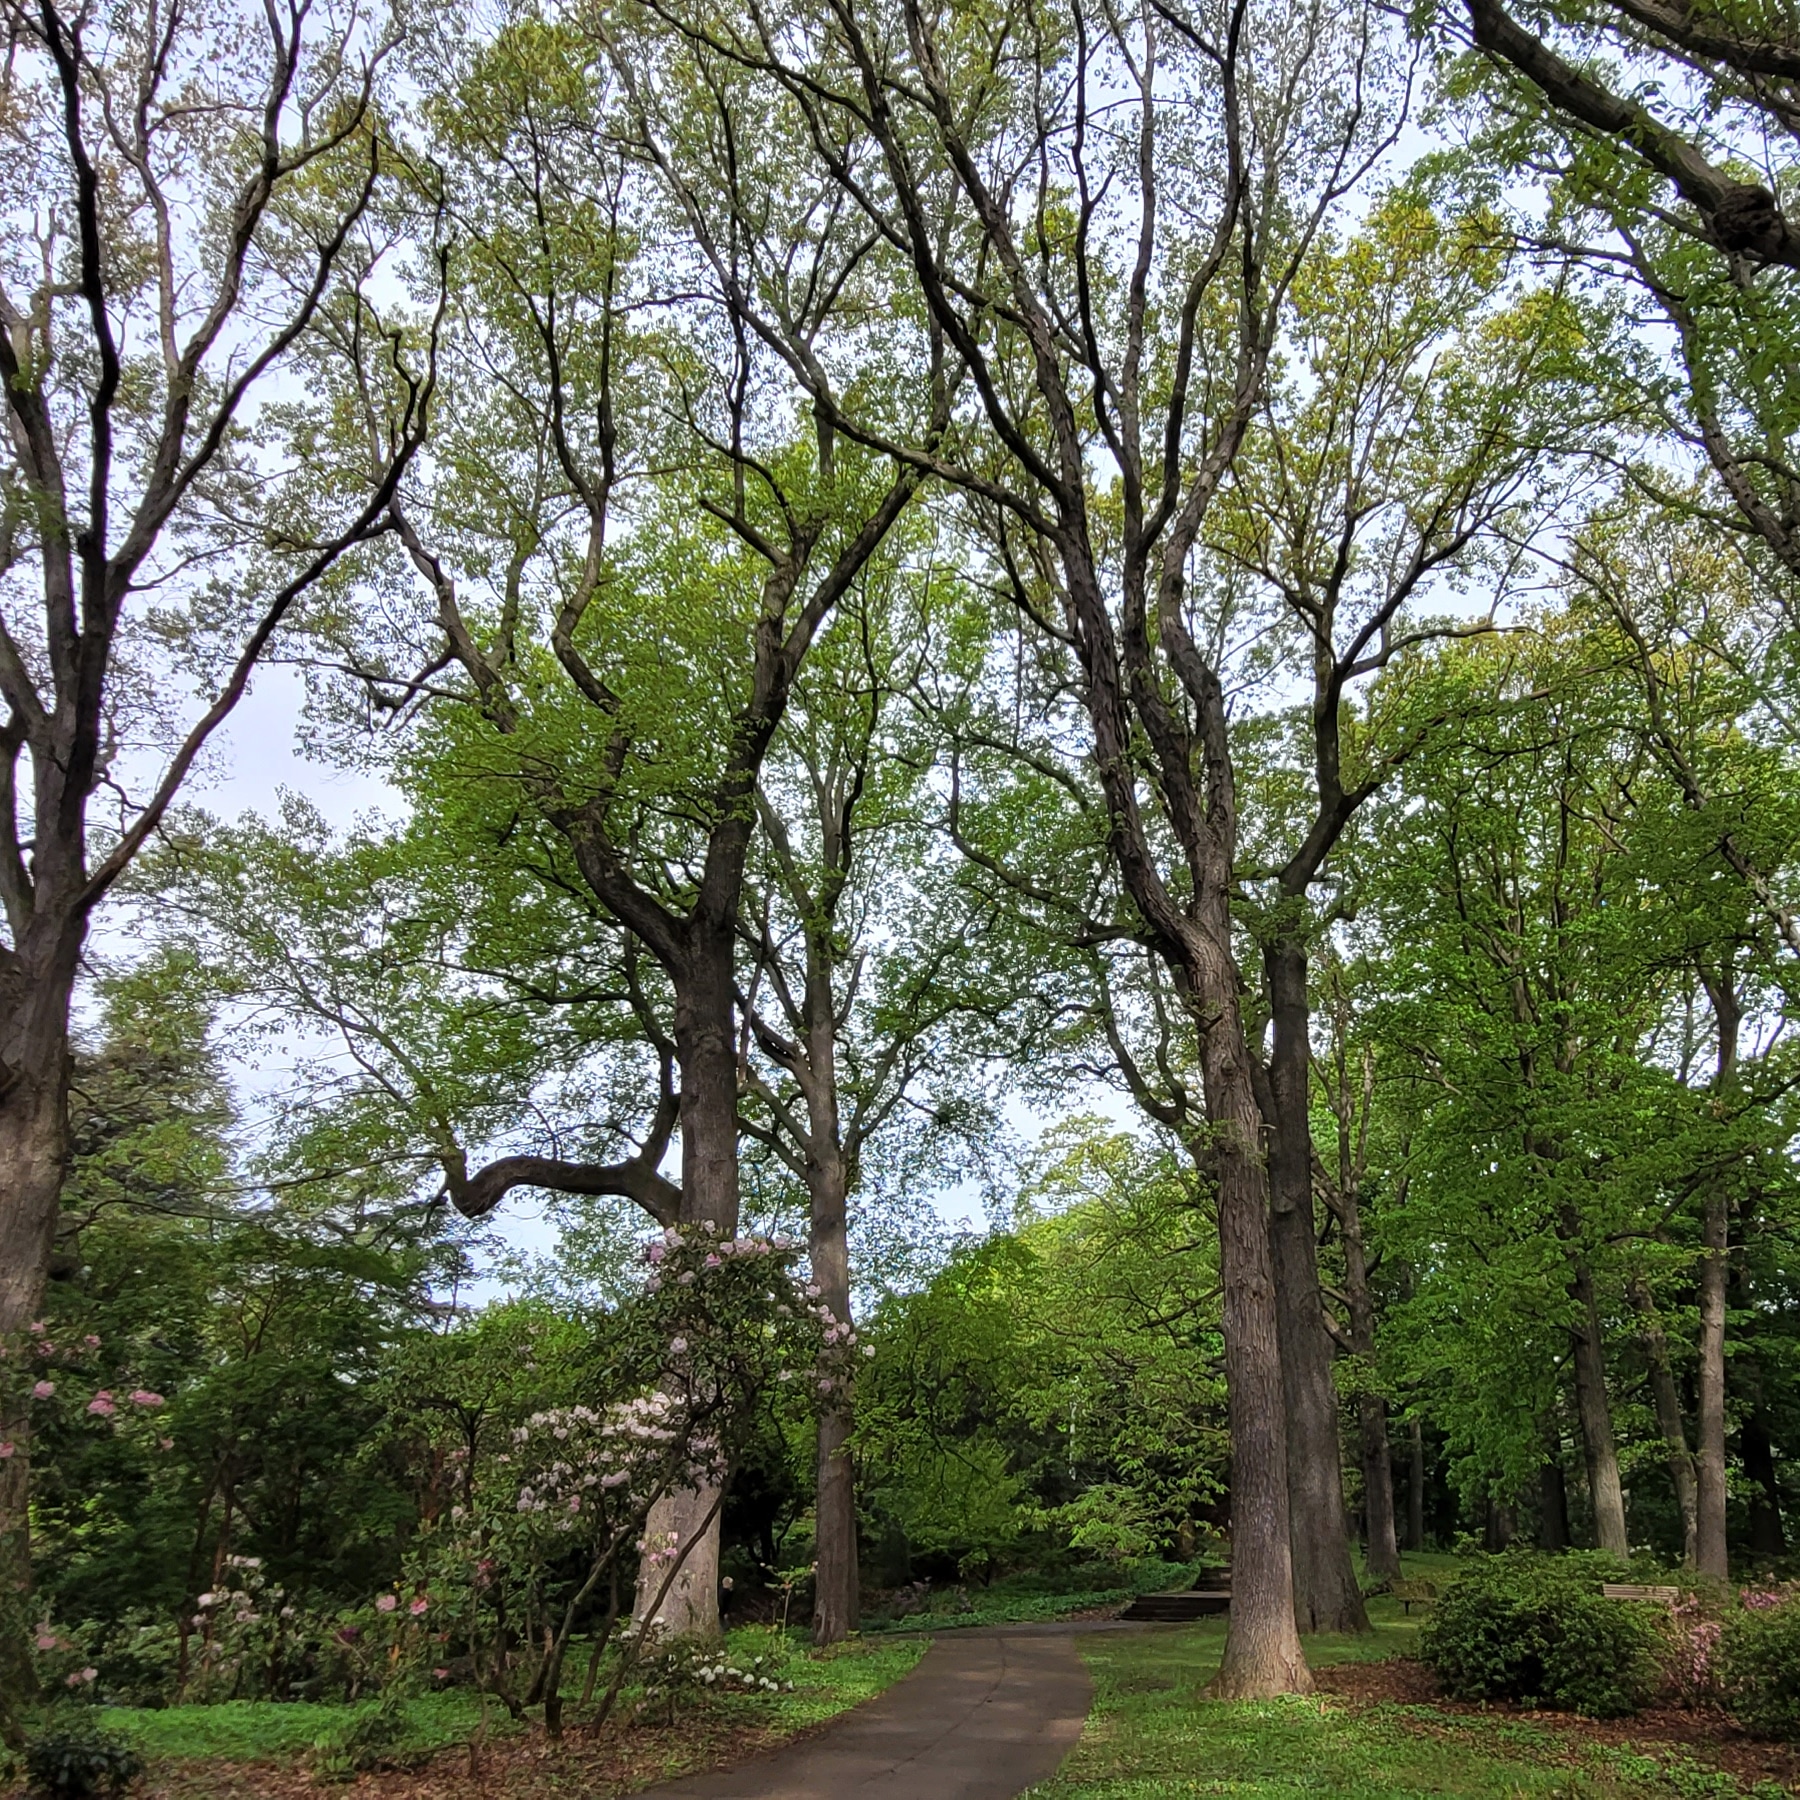 One of the old, tree-lined walking paths in Highland Park, established in 1883. 